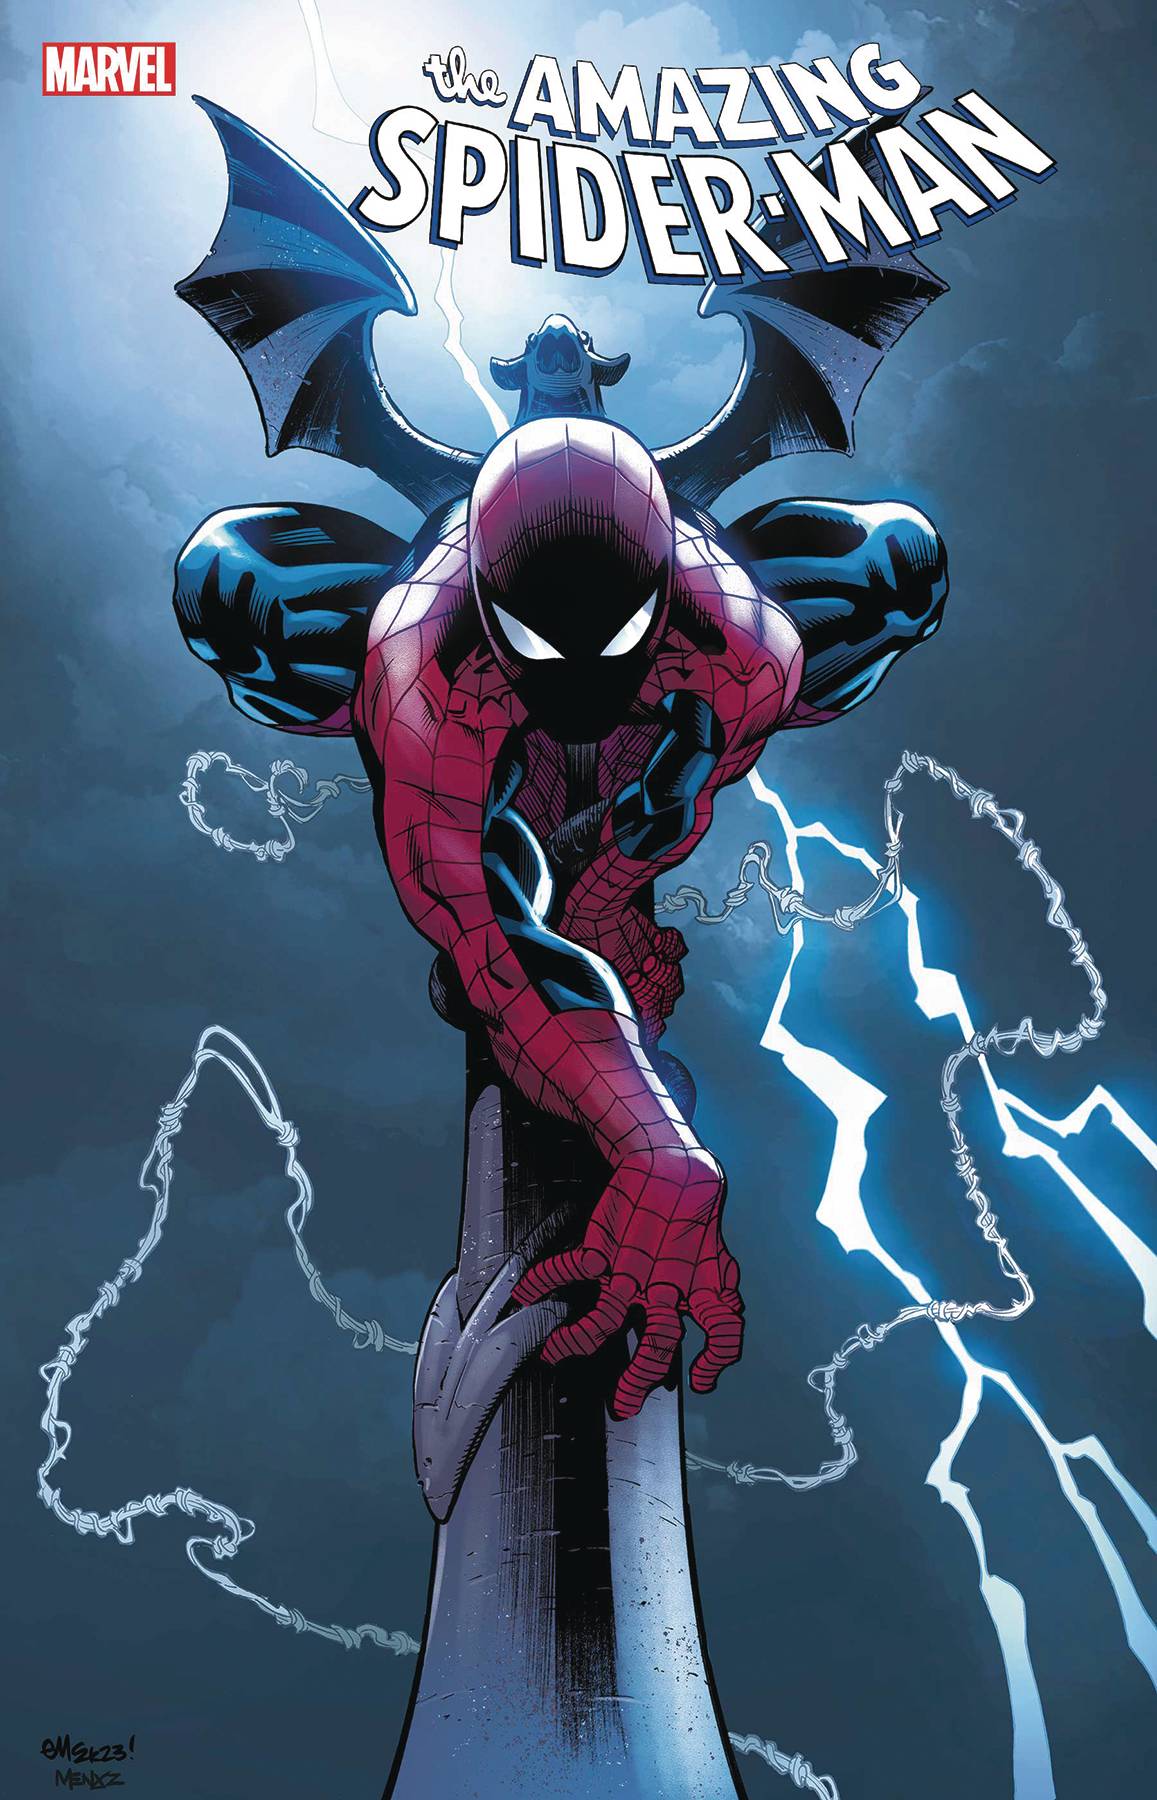 Marvel Preview: The Amazing Spider-Man #39